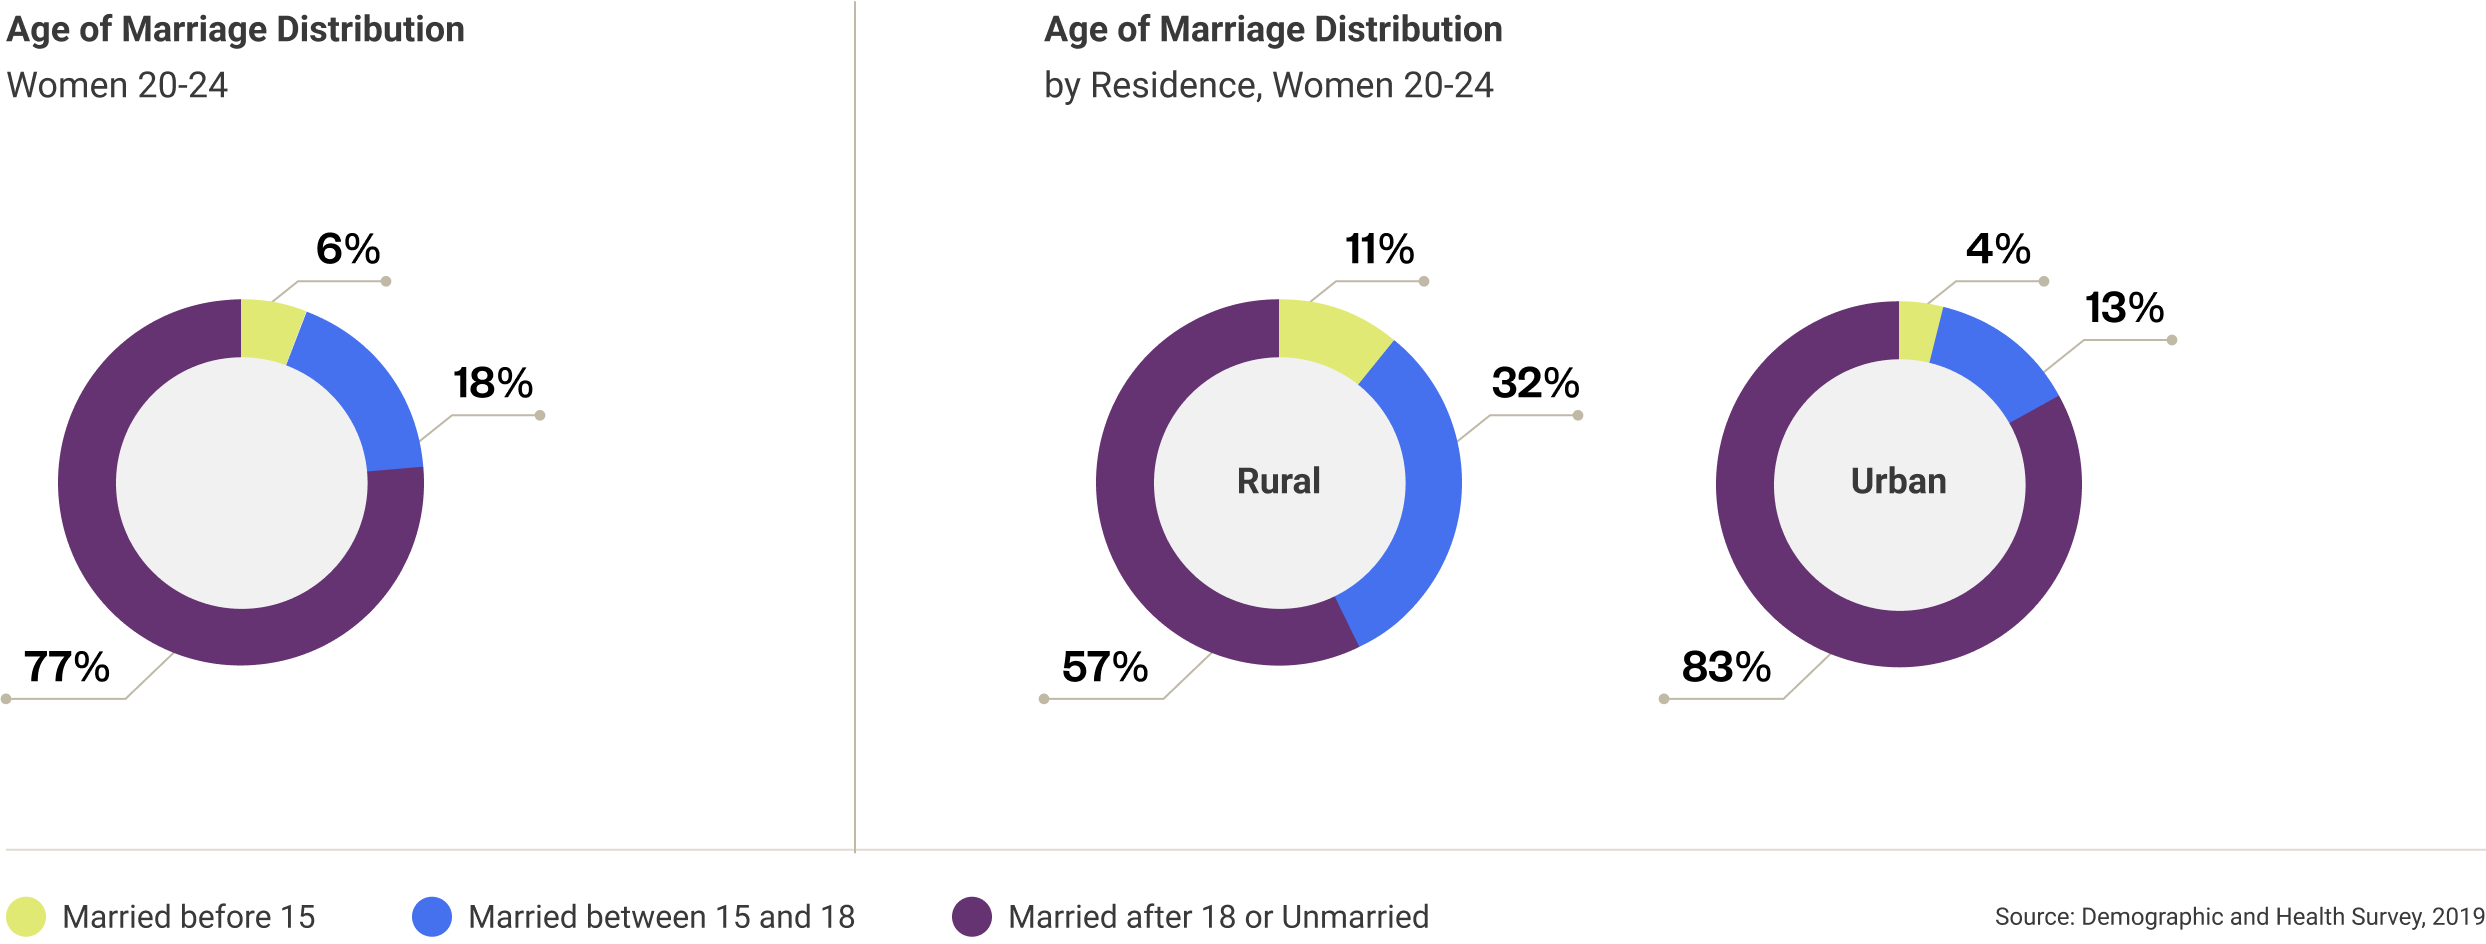 the-gambia-age-of-marriage-distribution-1.png